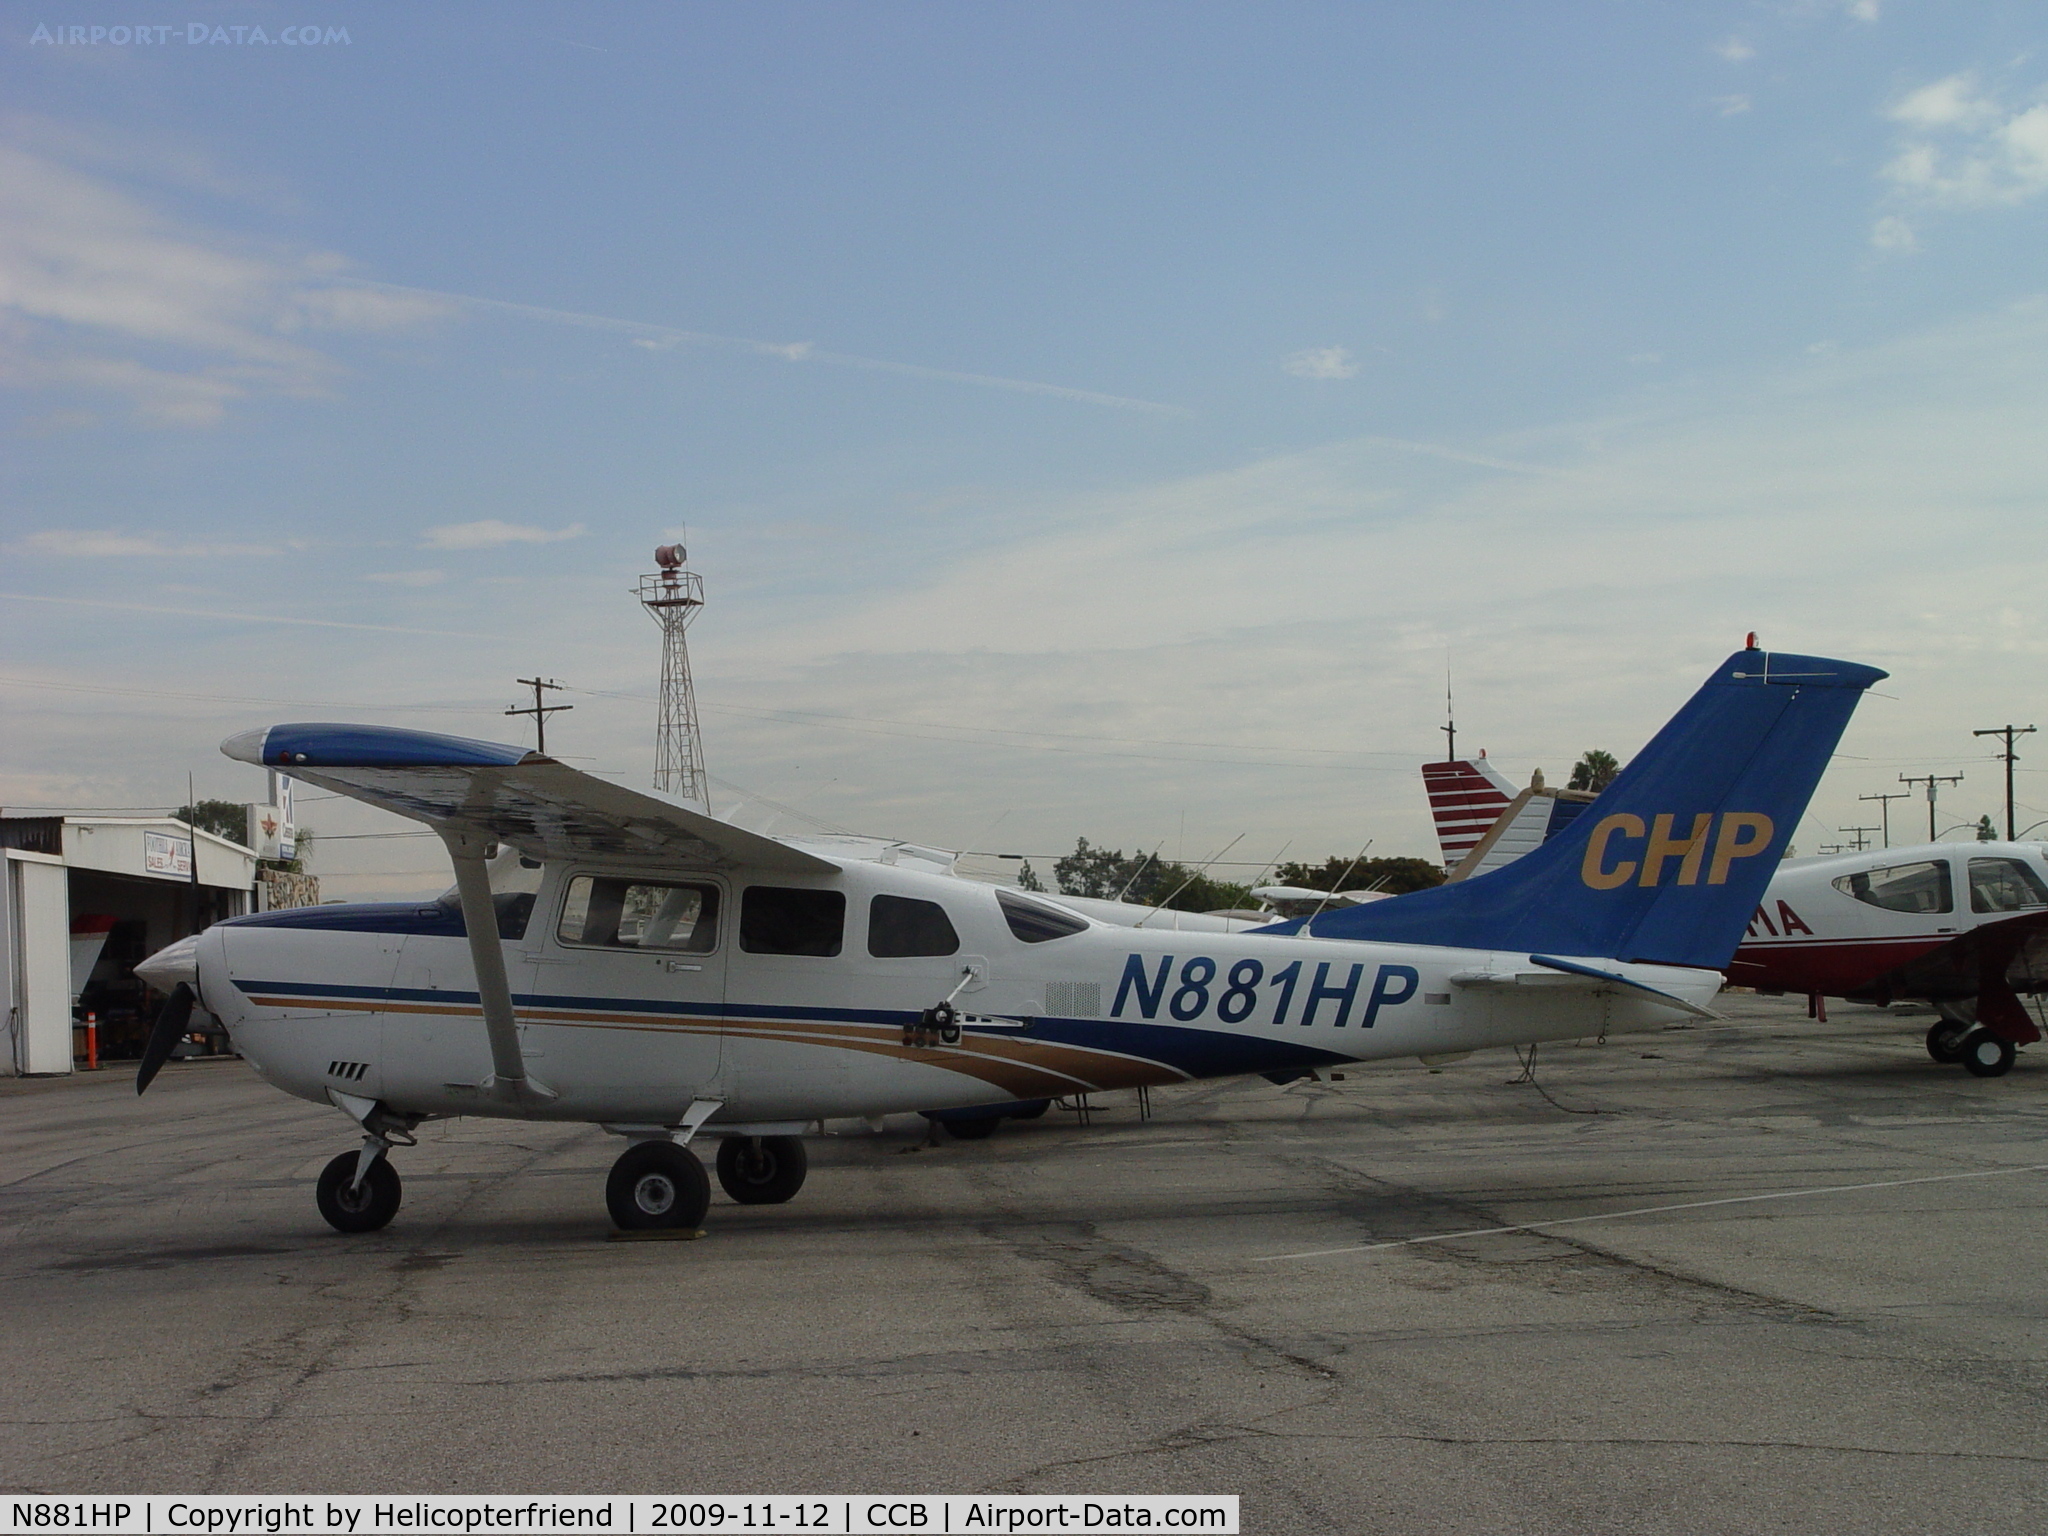 N881HP, 2000 Cessna T206H Turbo Stationair C/N T20608234, Parked waiting for mechanical work